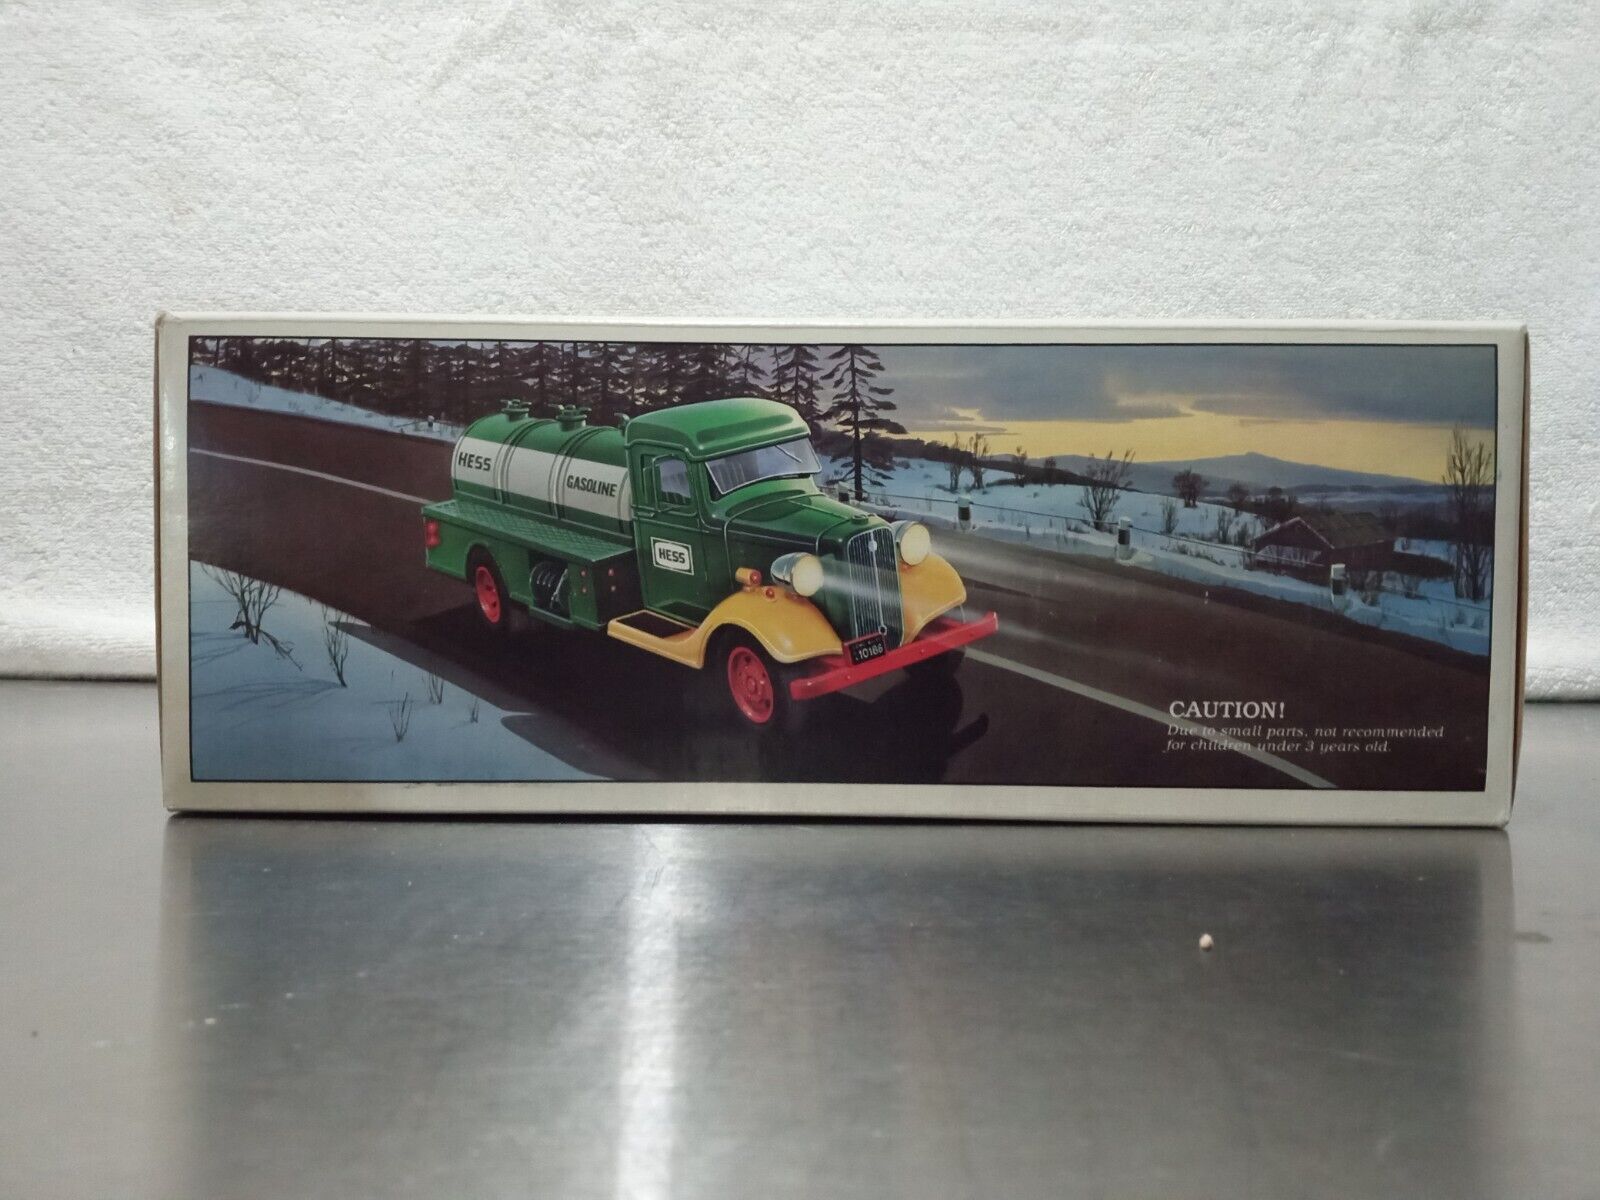 (8) 1985 First Hess Truck Toy Bank, Still in Original Box , Excellent Condition